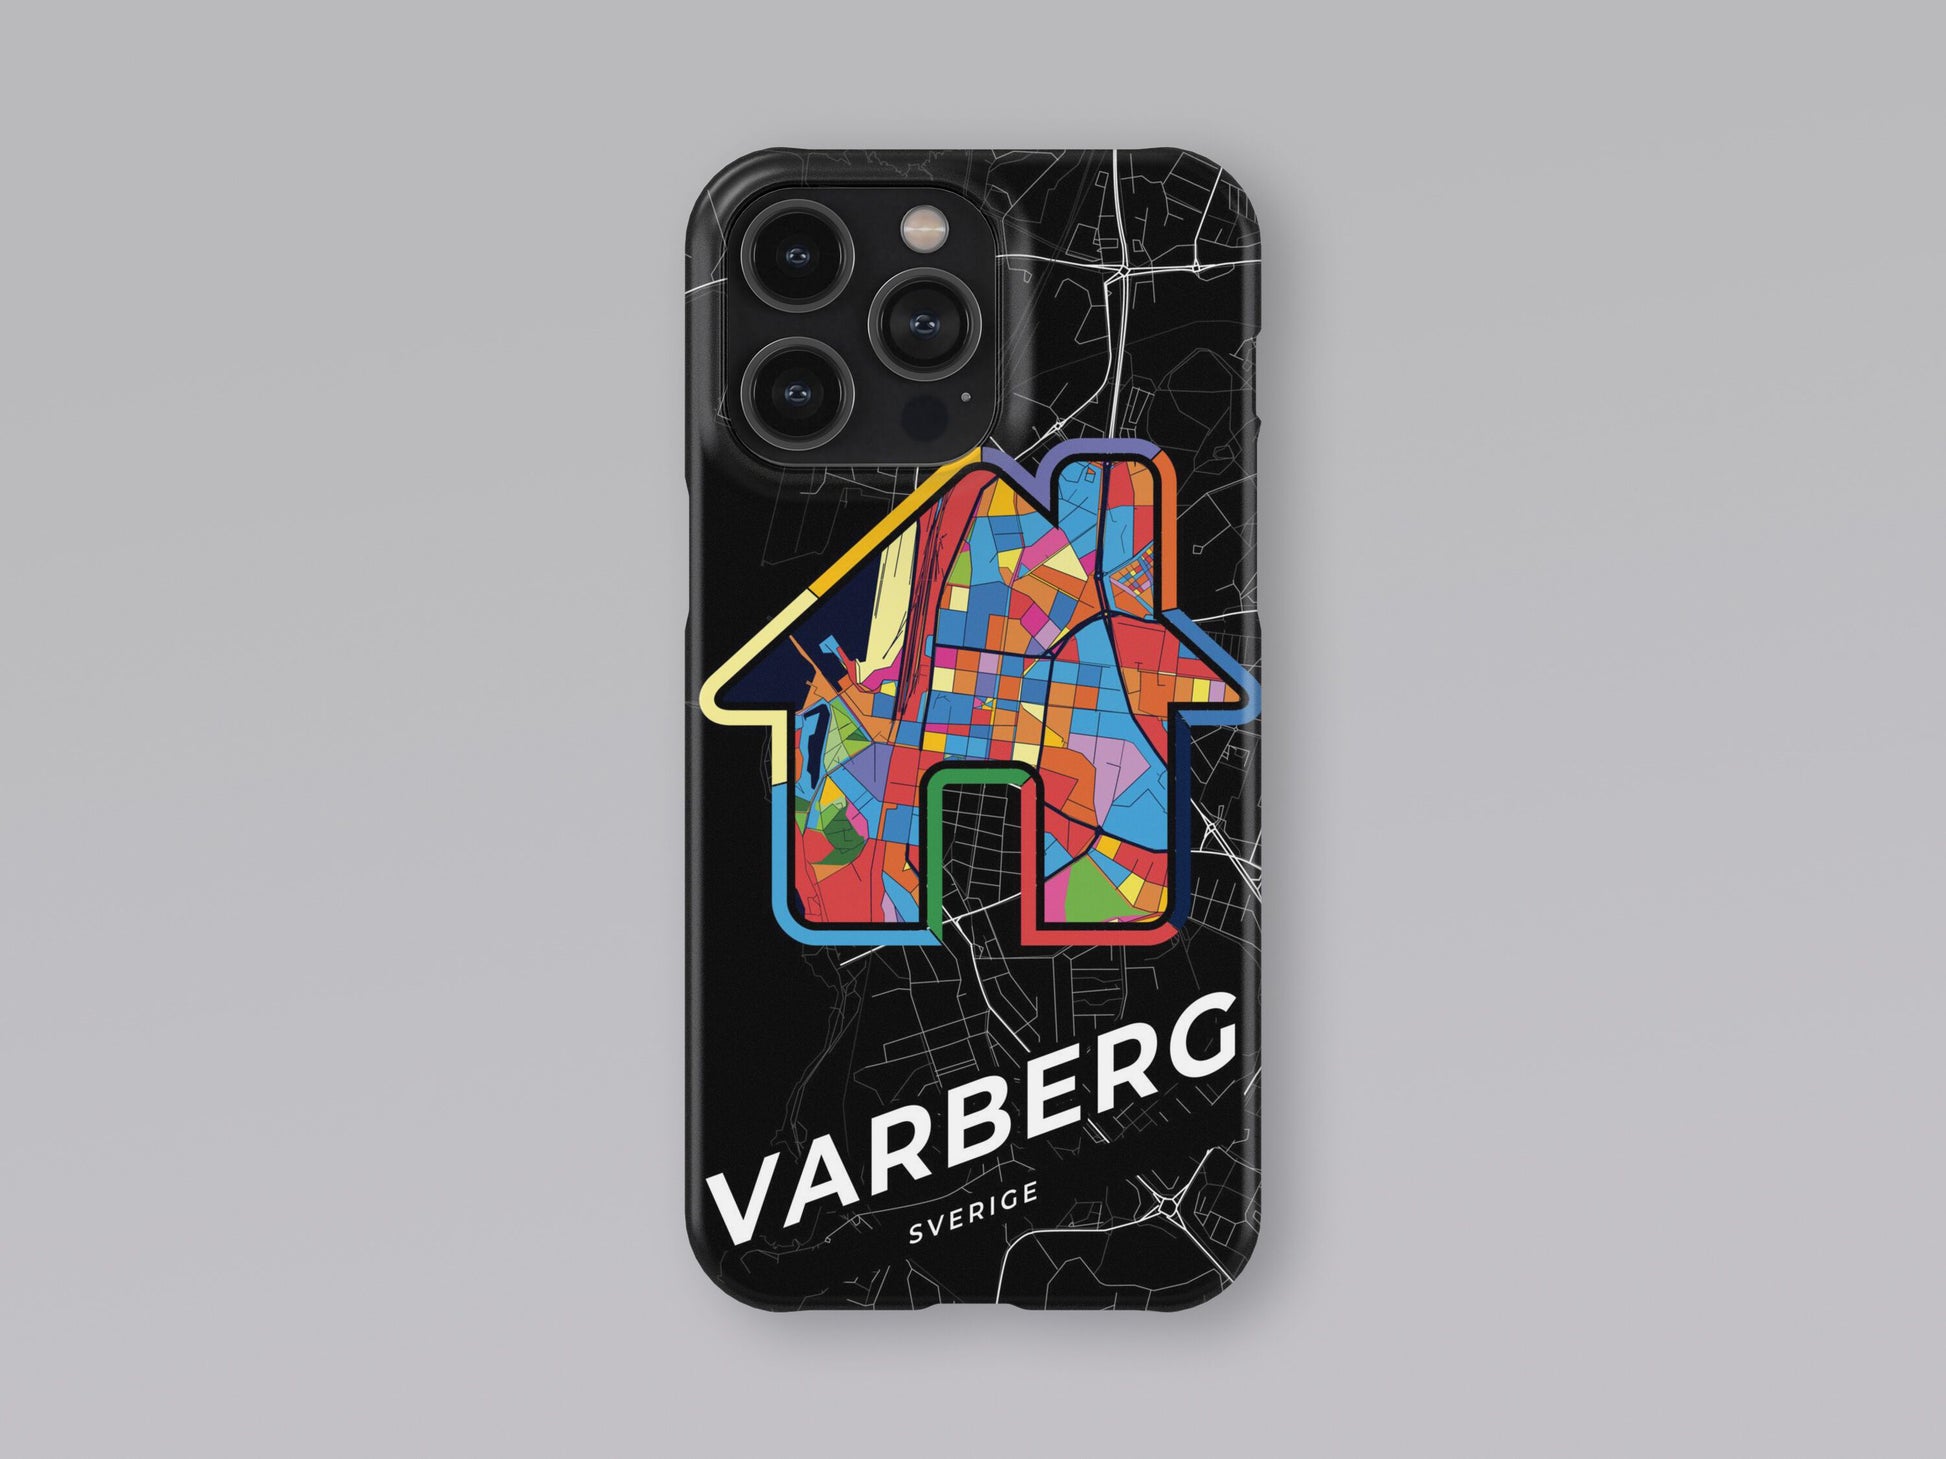 Varberg Sweden slim phone case with colorful icon 3